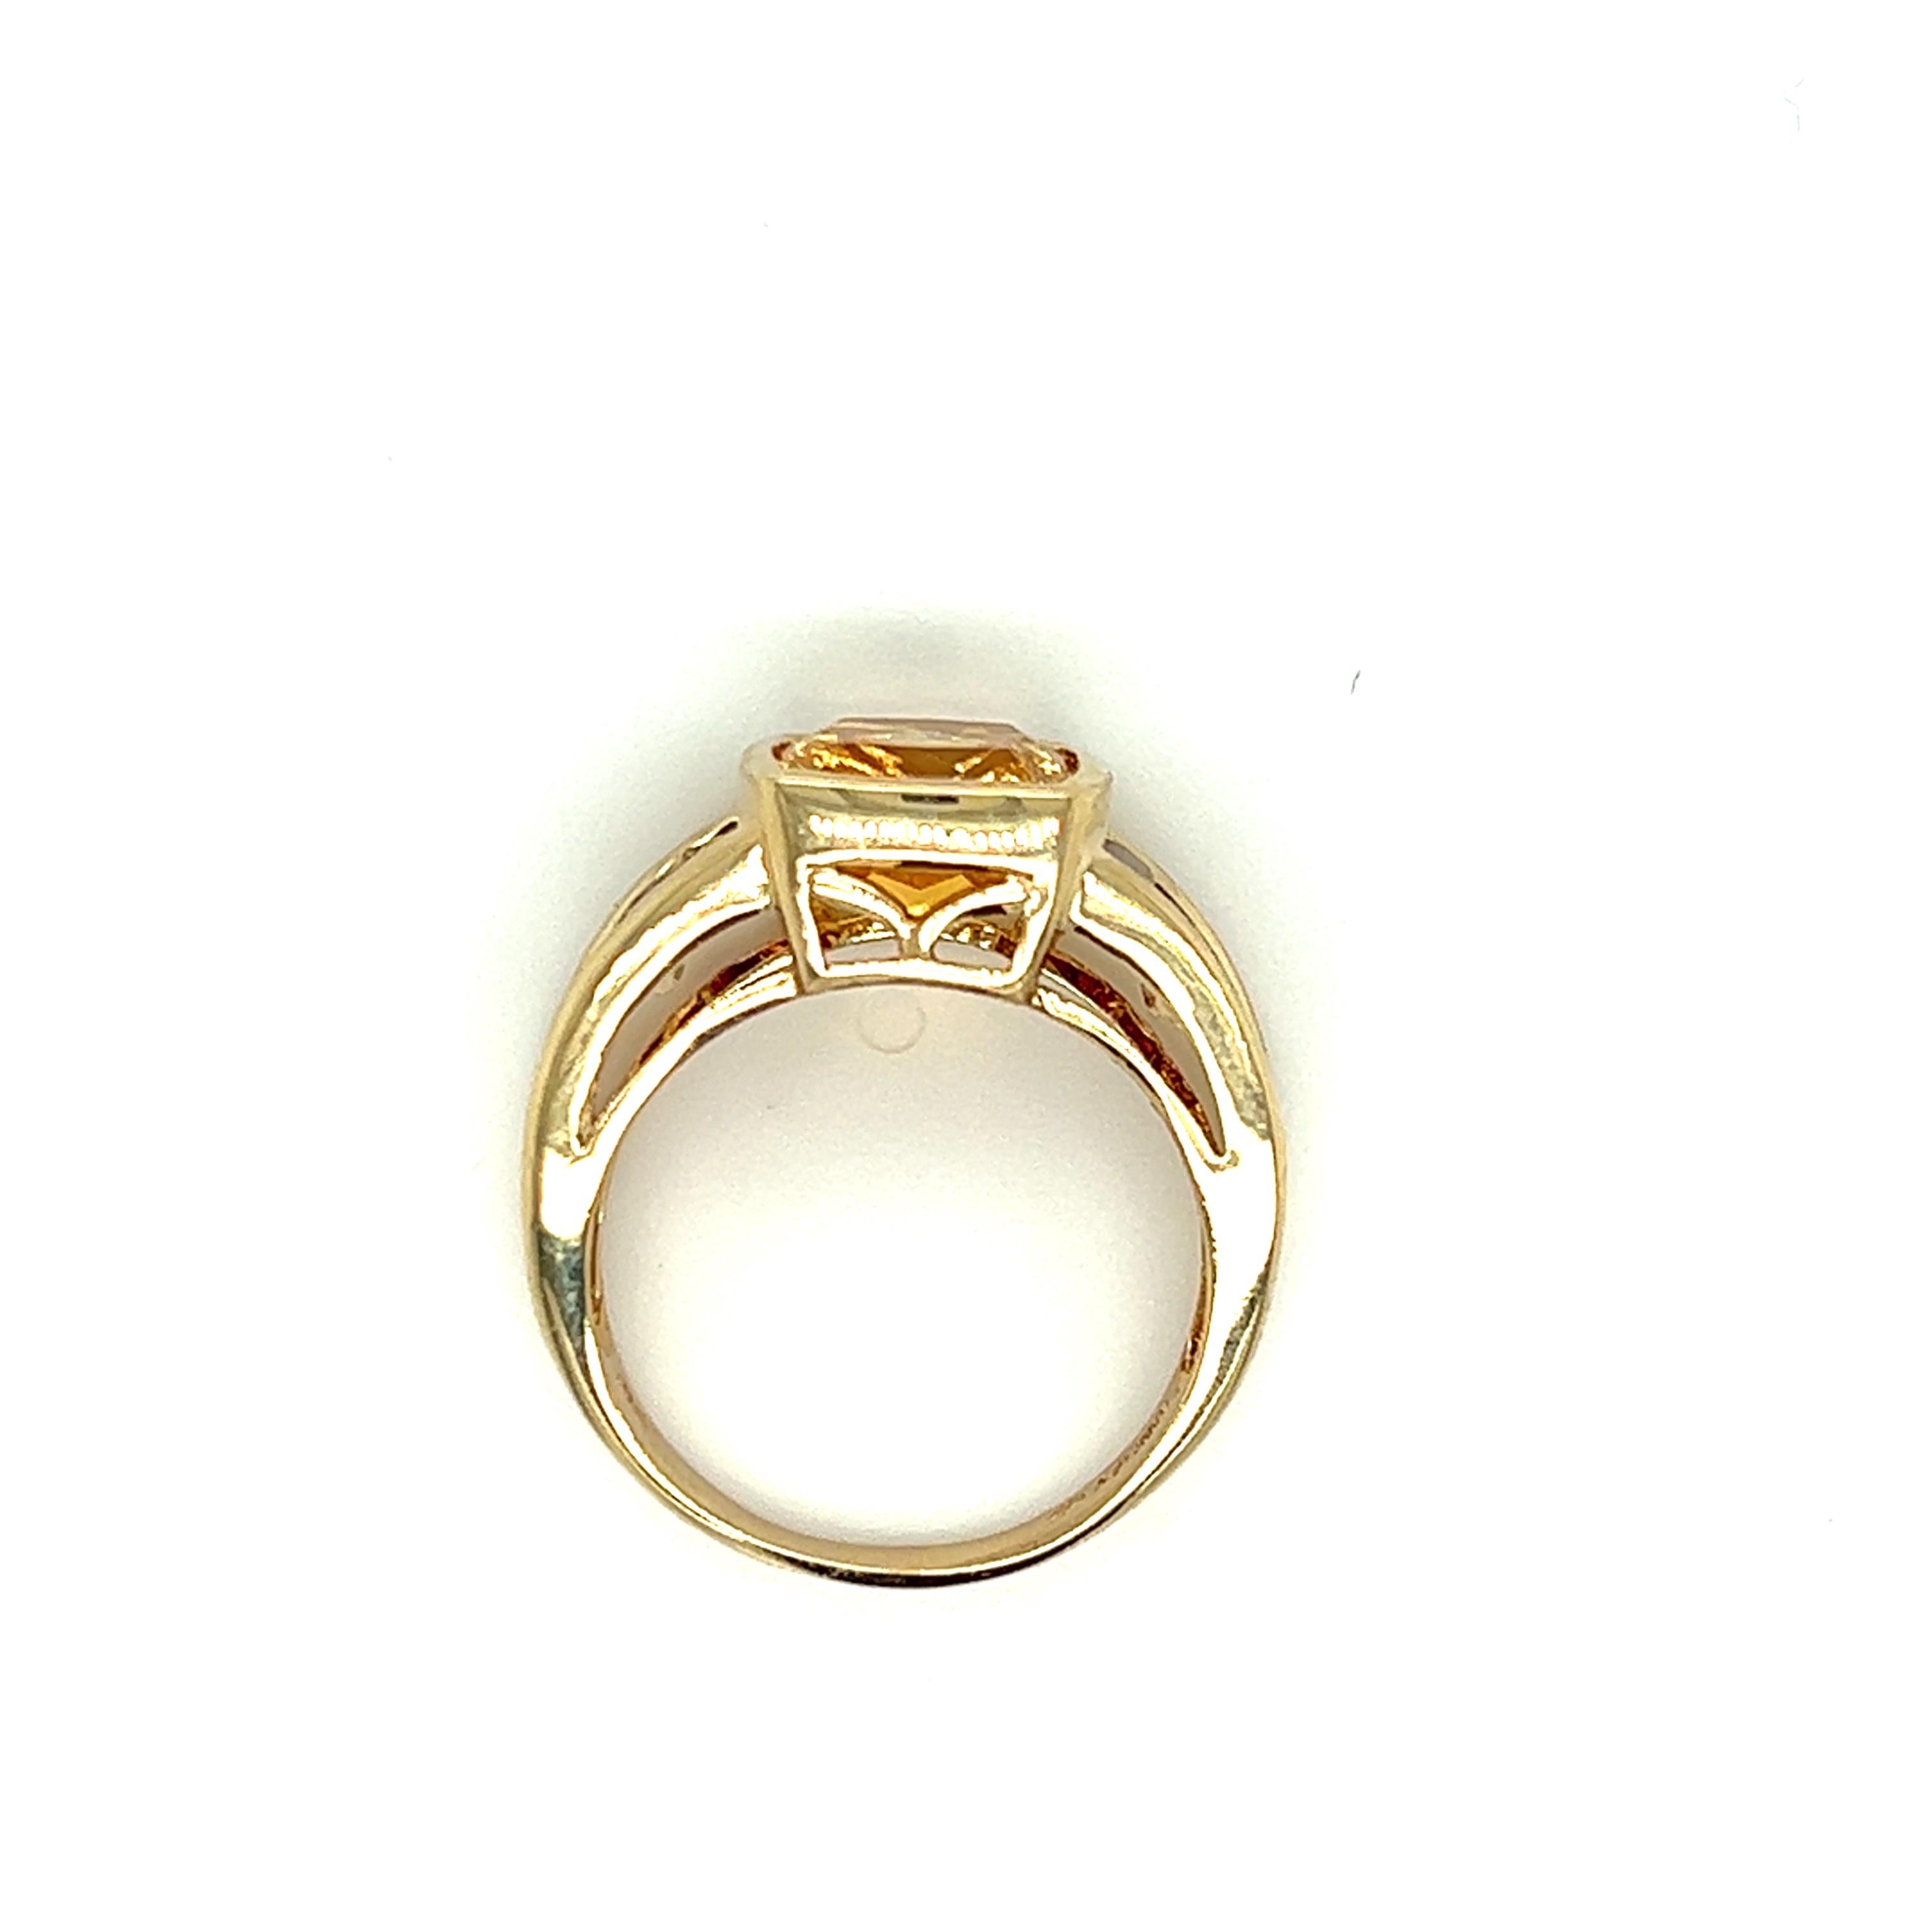 Contemporary Citrine and Garnet Ring in 14k Yellow Gold